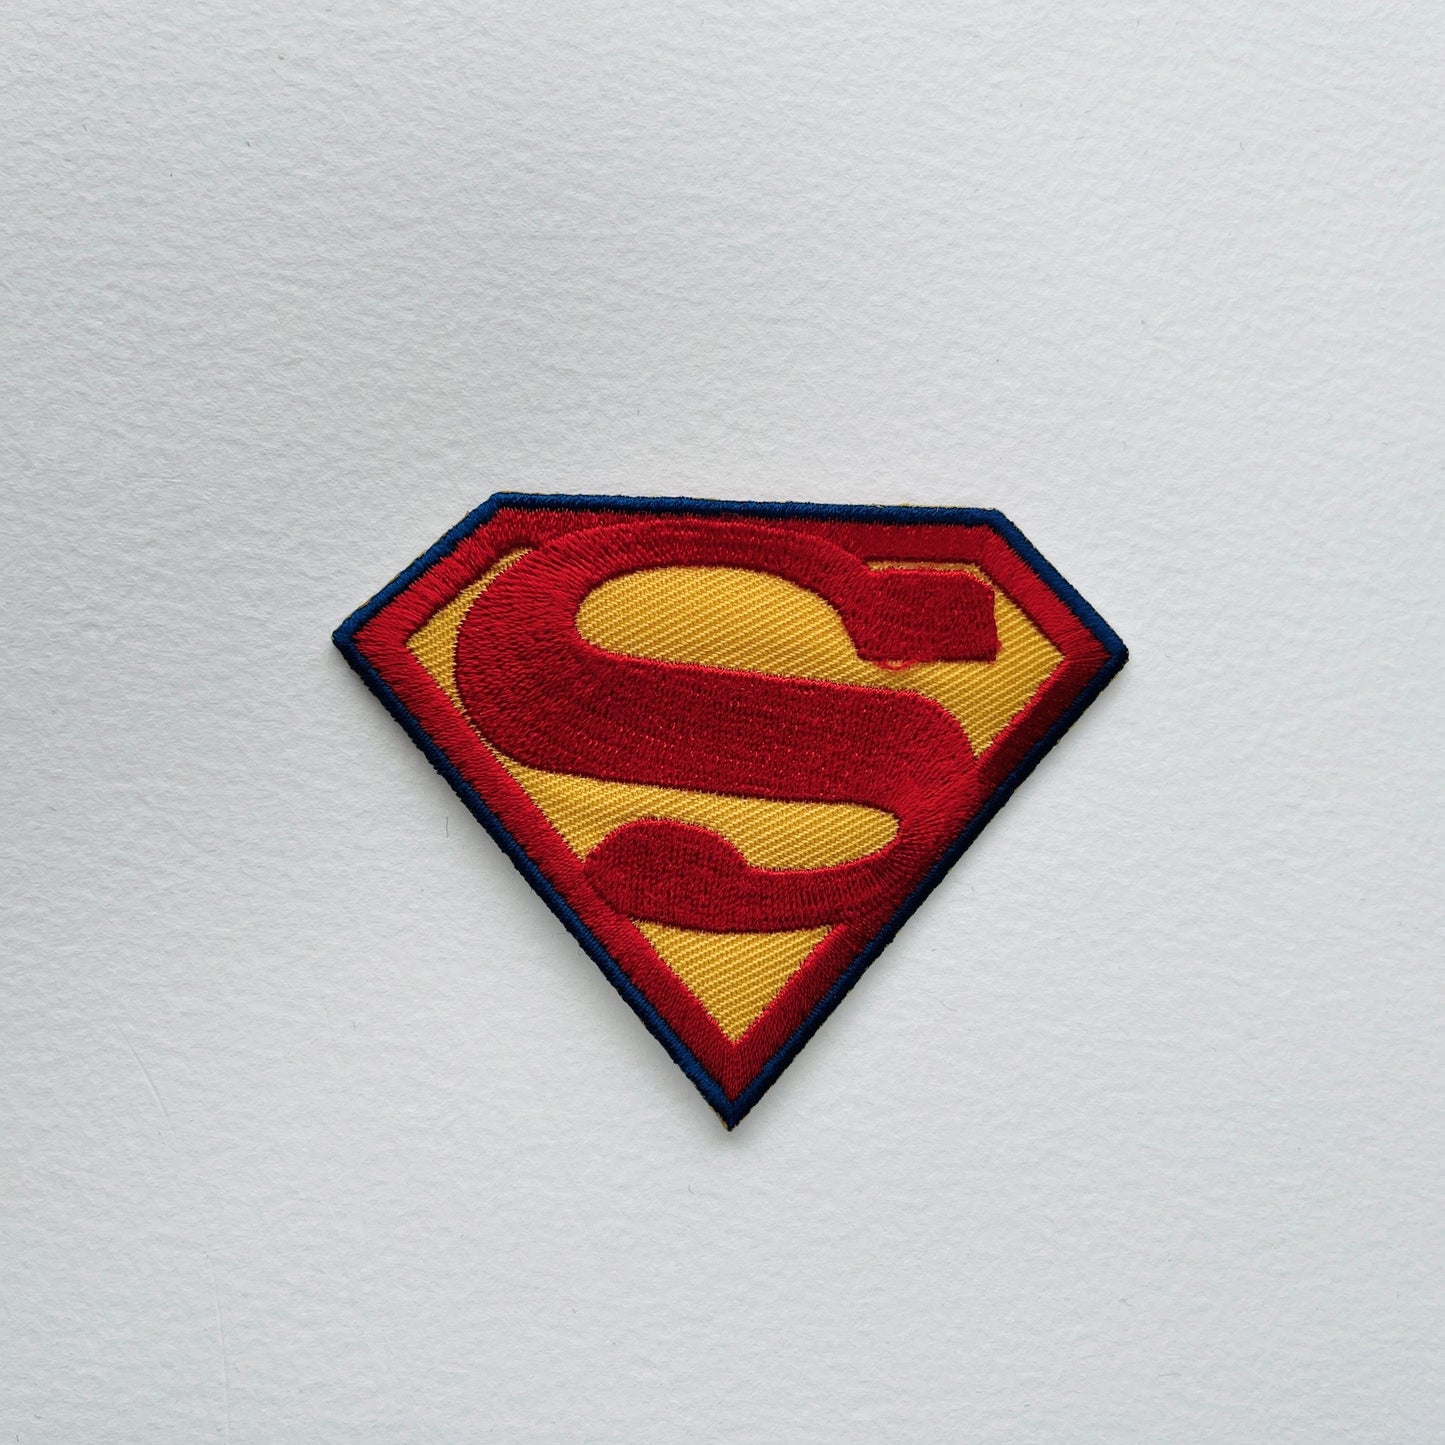 superman logo embroidered iron on embroidered patch appliqué badge